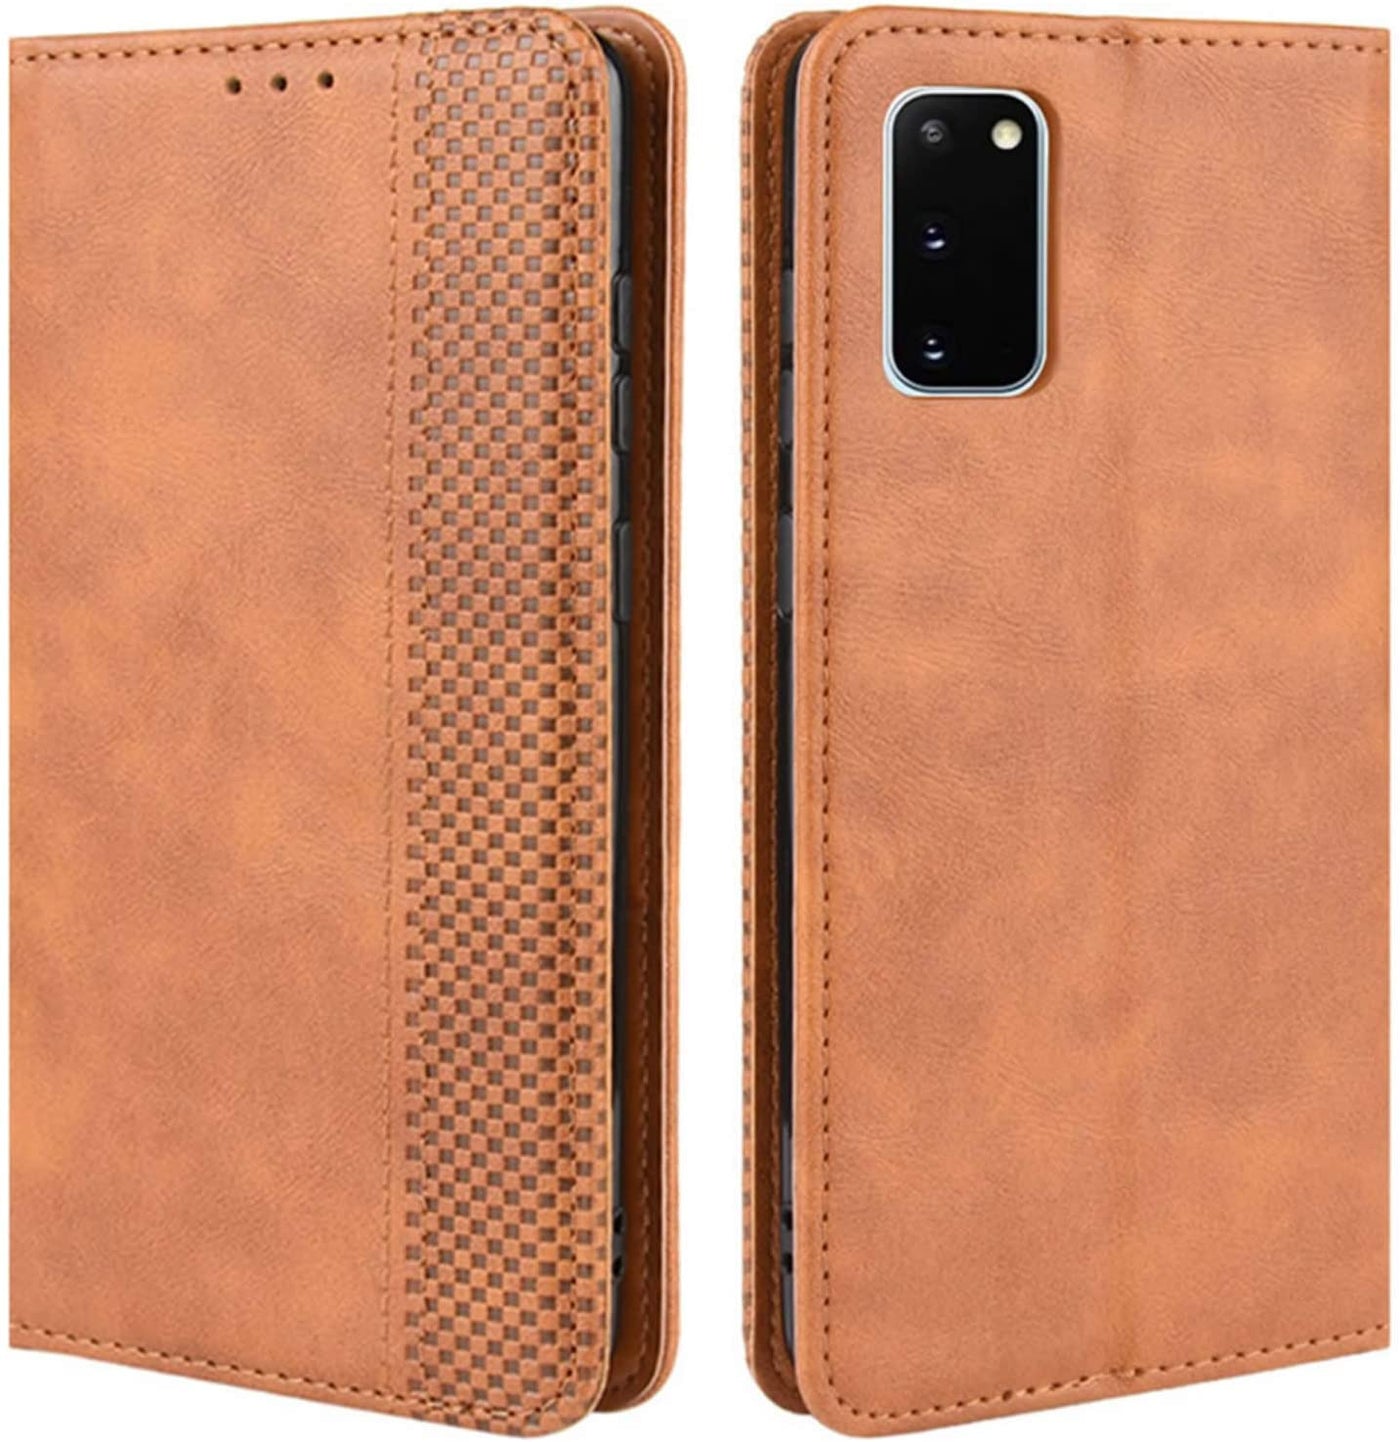 Samsung Galaxy S20 5G brown color leather wallet flip cover case By excelsior